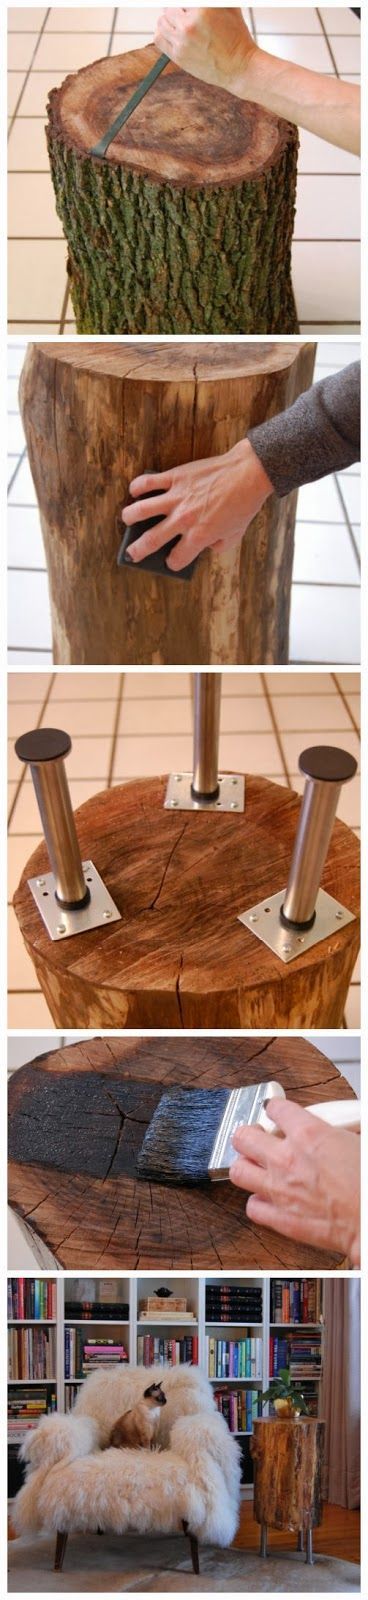 How to Make a Tree Stump Table